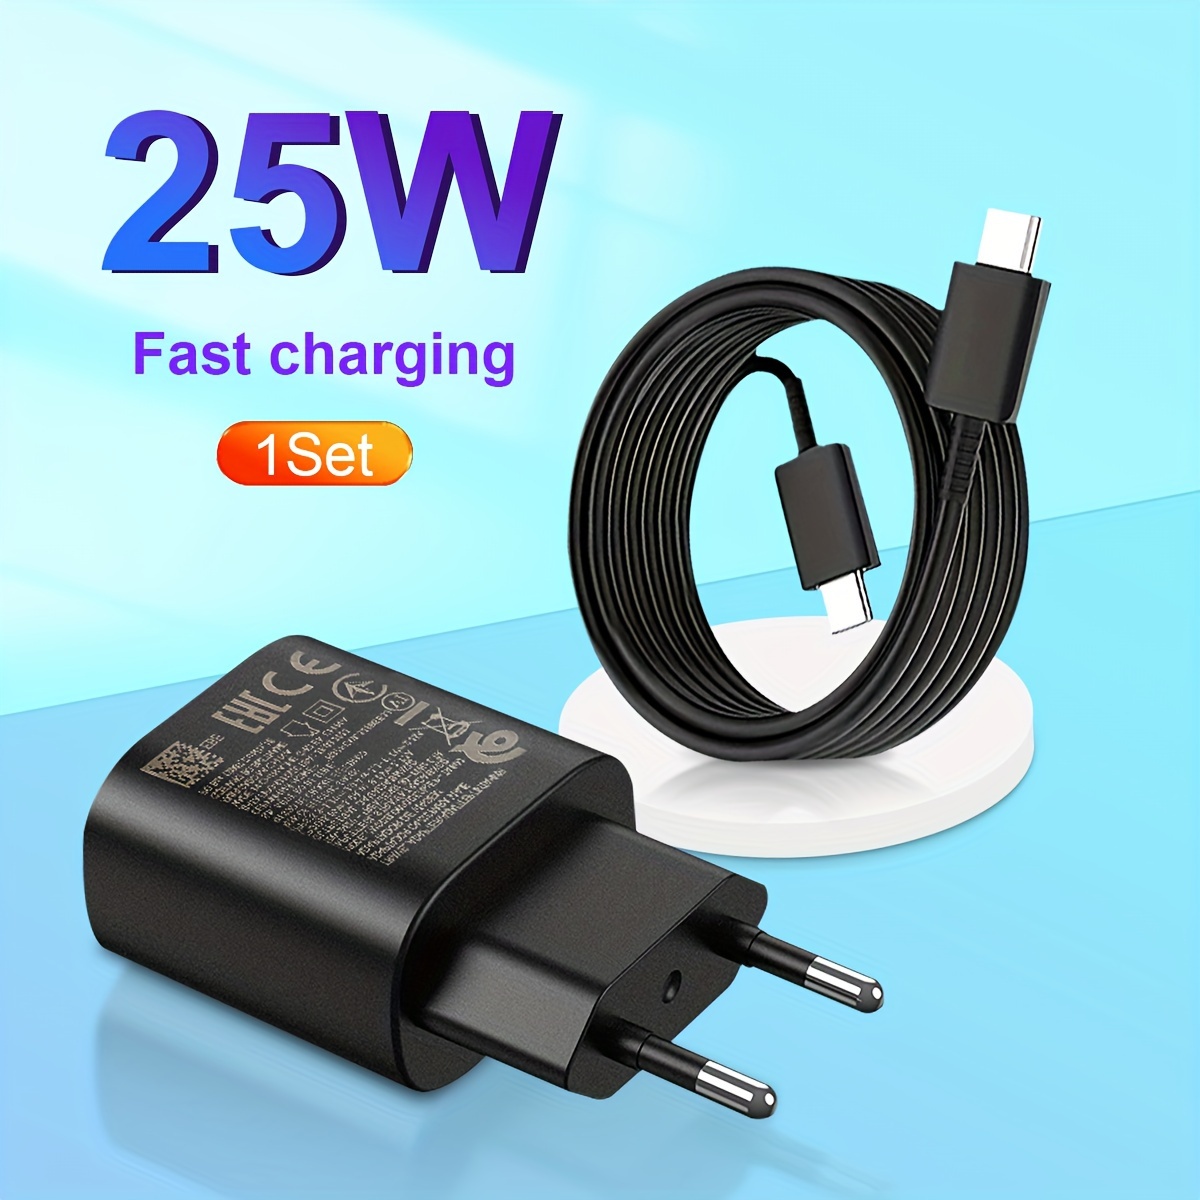 

25w Usb C Fast Charger With European Plug, Power Supply Wall Adapter For Samsung Galaxy S24/s23/s22/s21/s20/note 20/10/a54/a53/tab/z Fold/flip, Usb Type-c Charging Cable Included